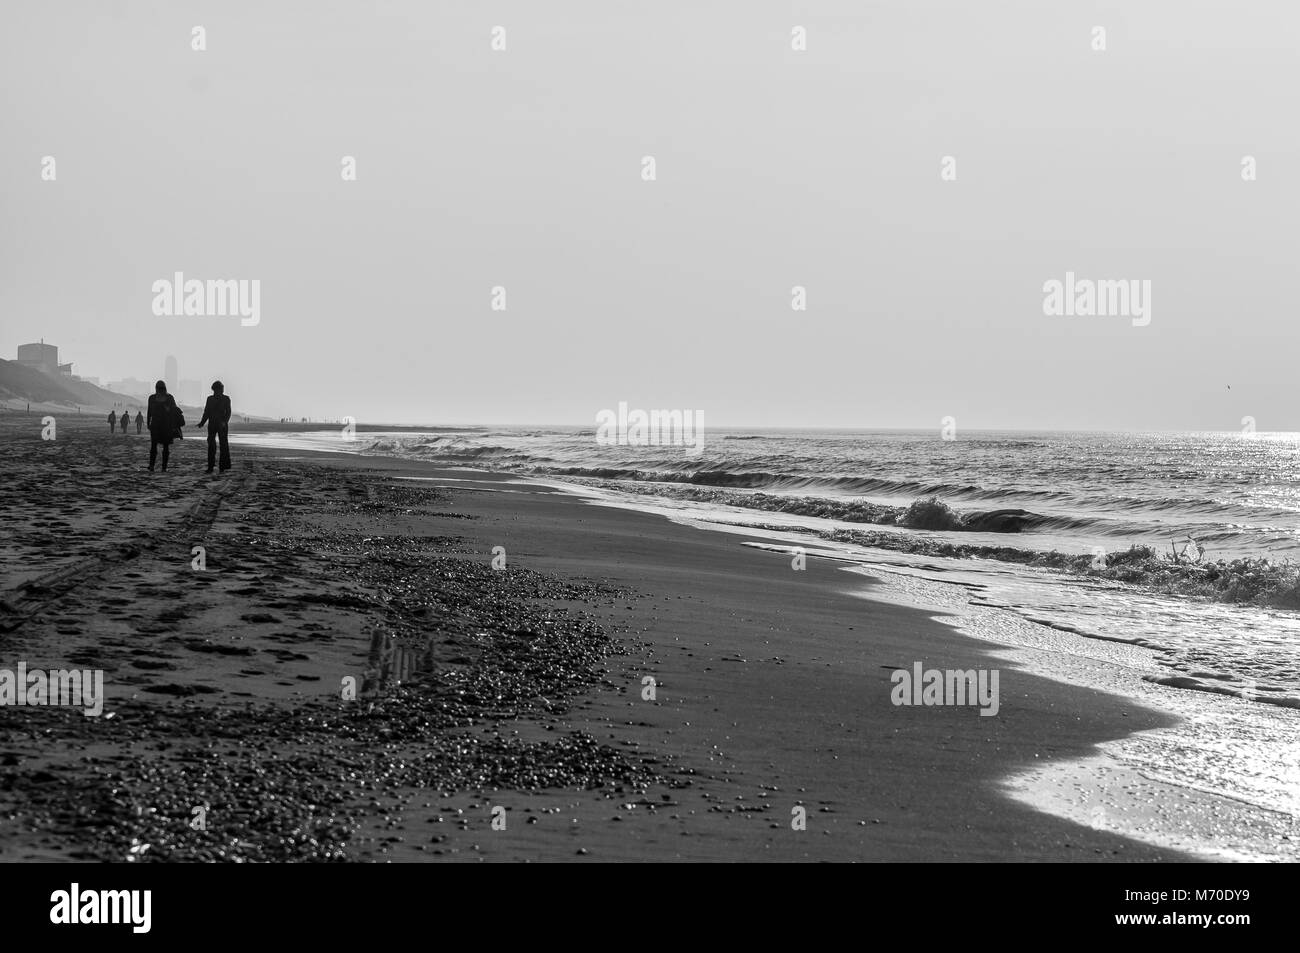 silhouette of two people walking on the beach Stock Photo